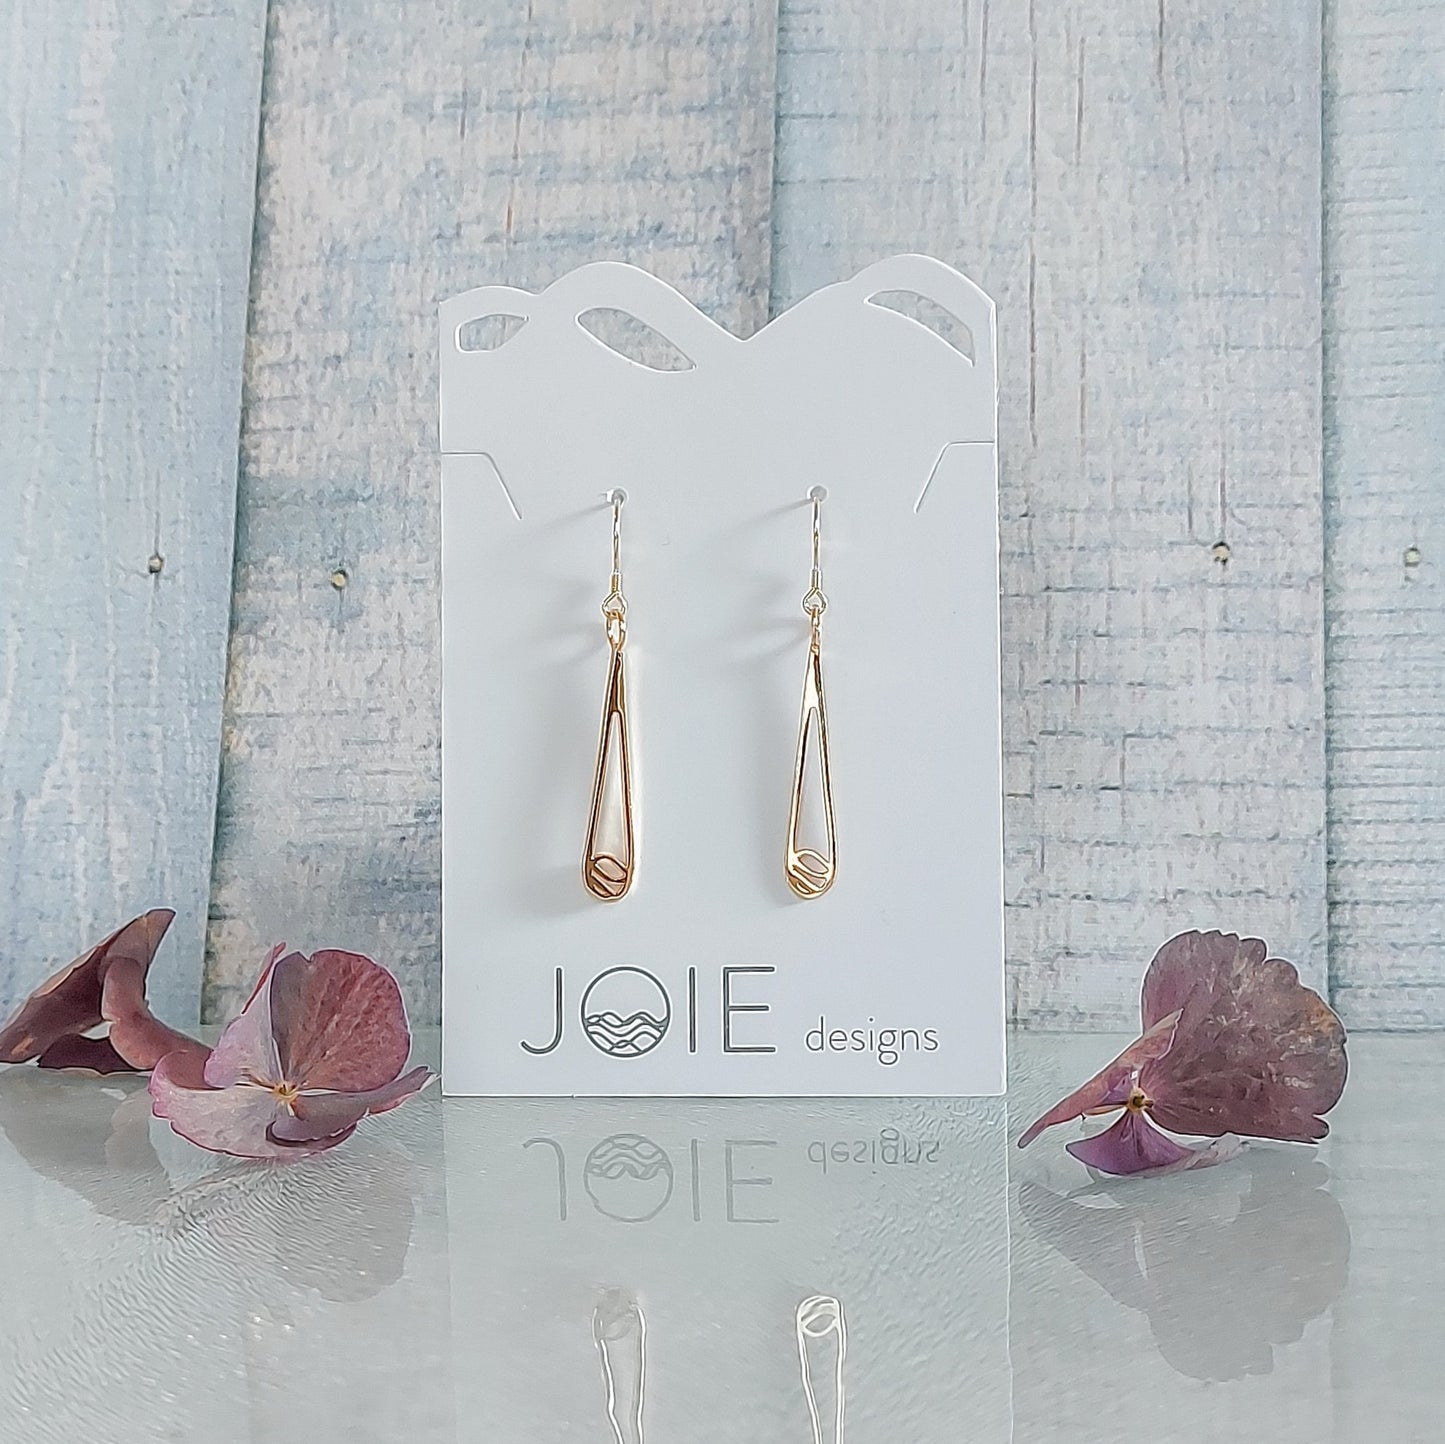 18k yellow gold plated Indra raindrop design earrings showcased on a jewellery card with book background and purple flowers